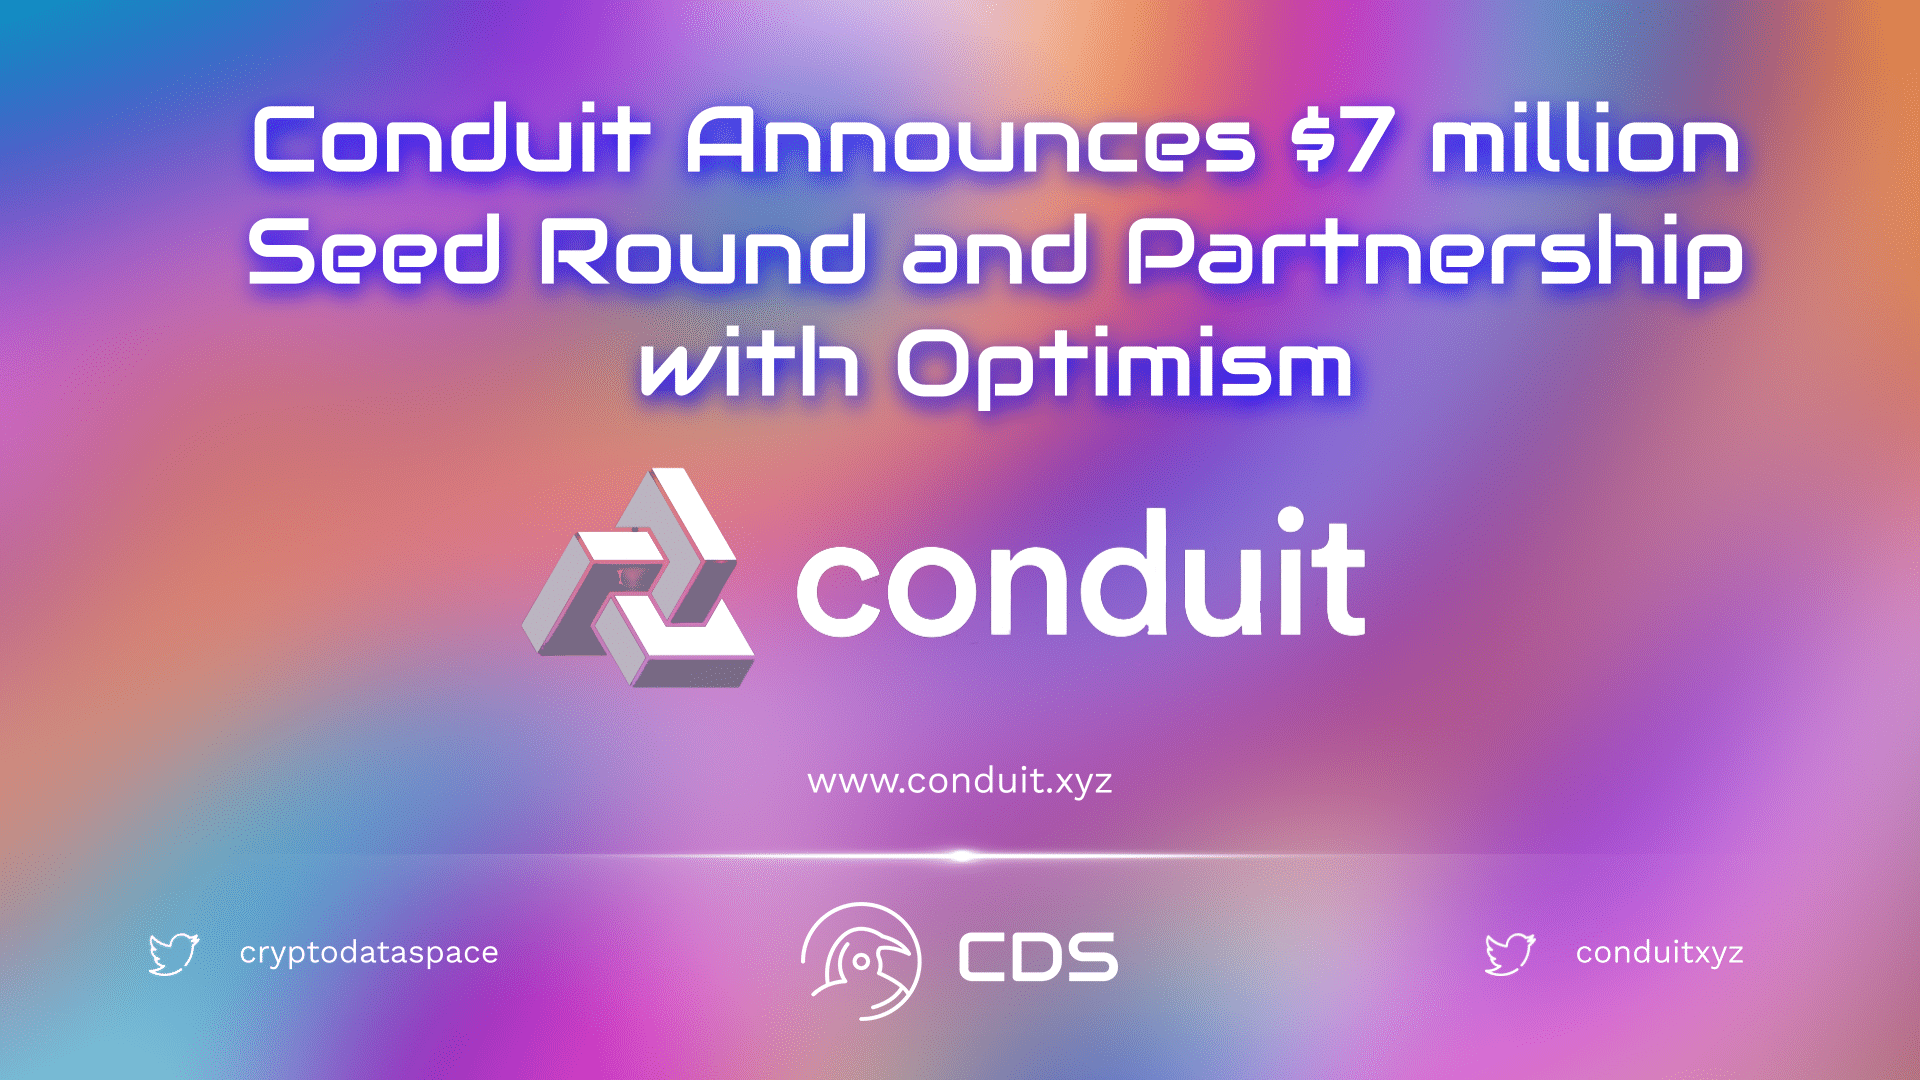 Conduit Announces $7 million Seed Round and Partnership with Optimism